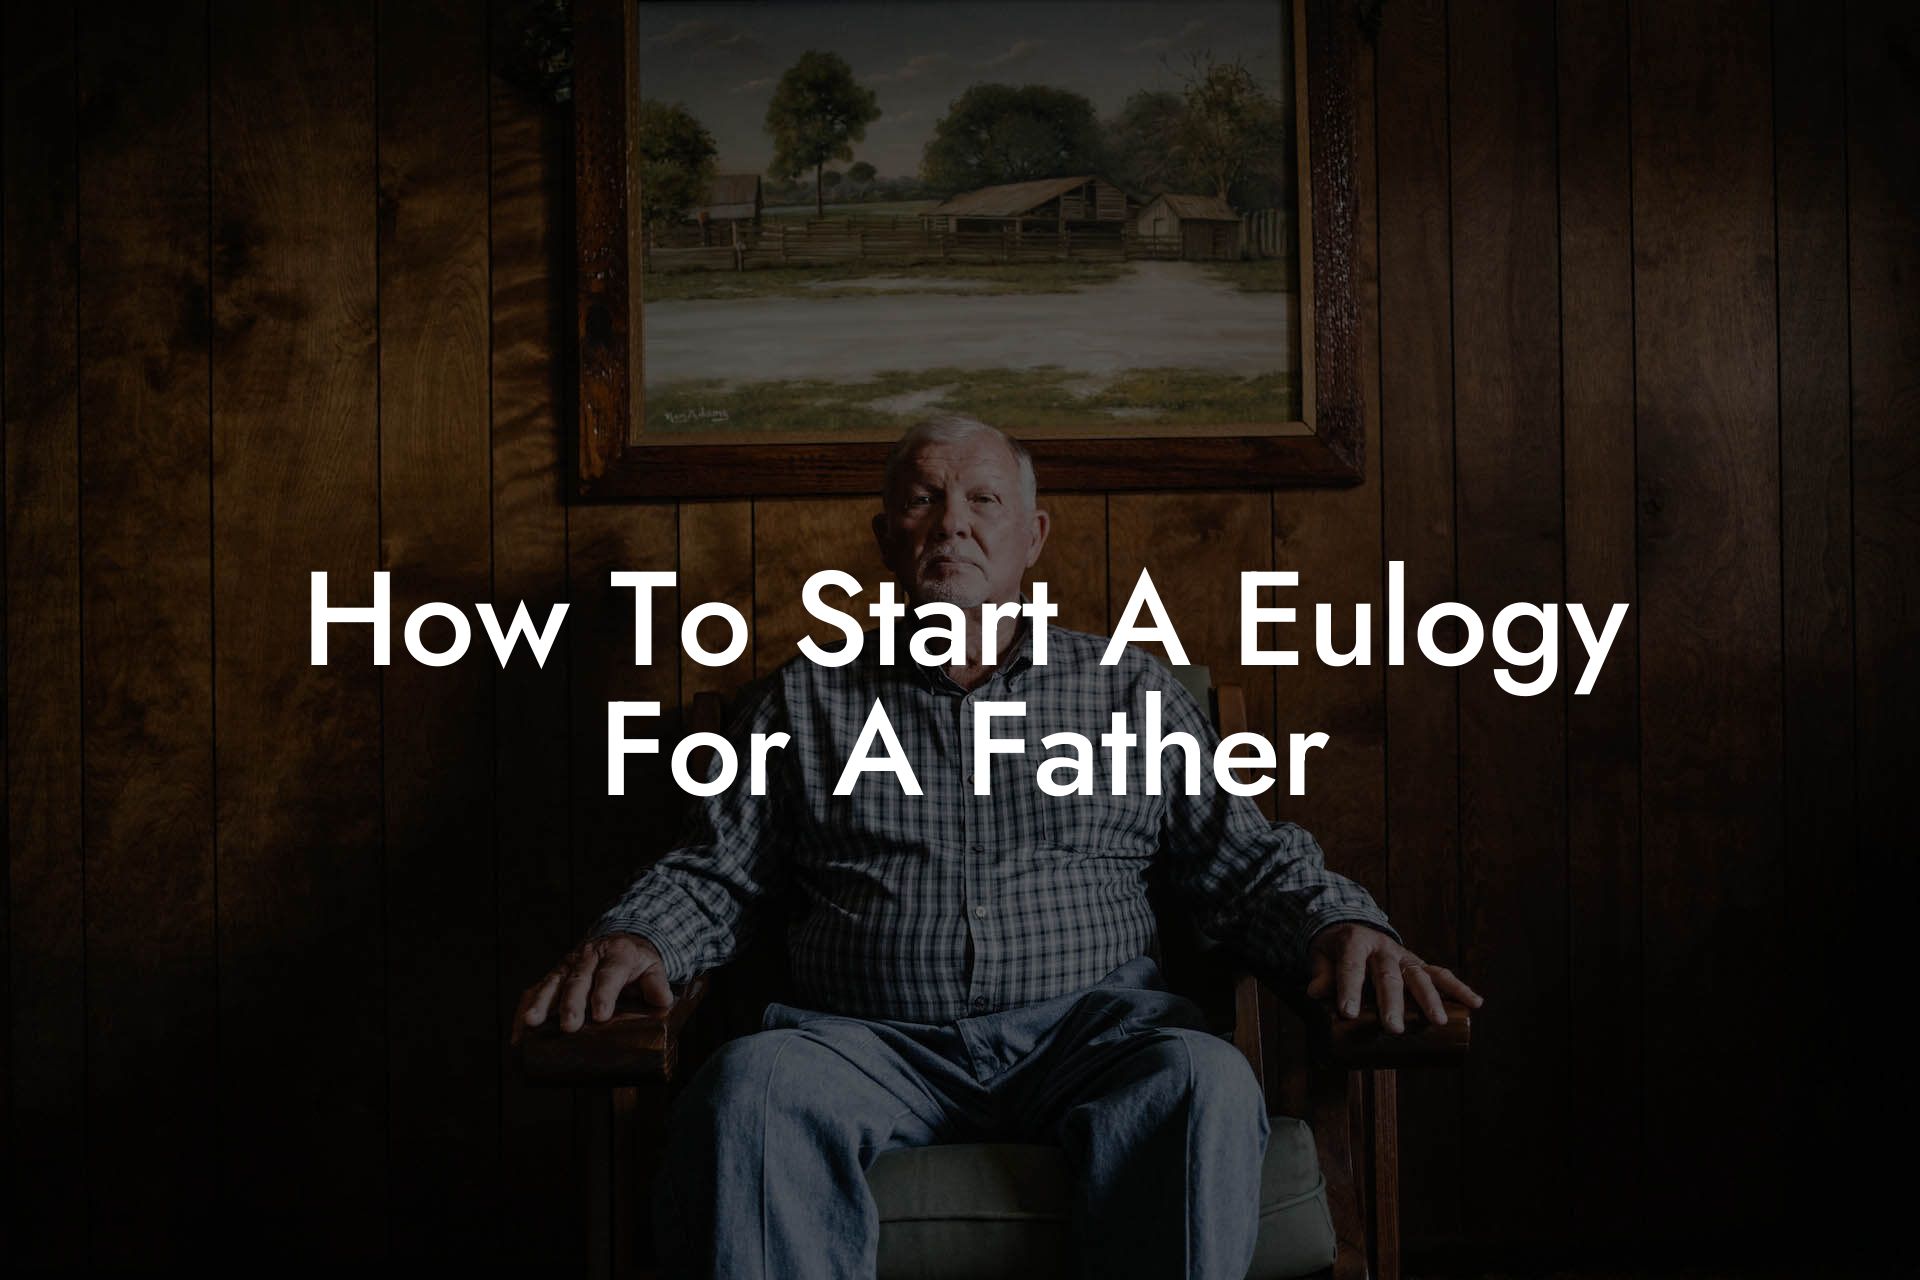 How To Start A Eulogy For A Father